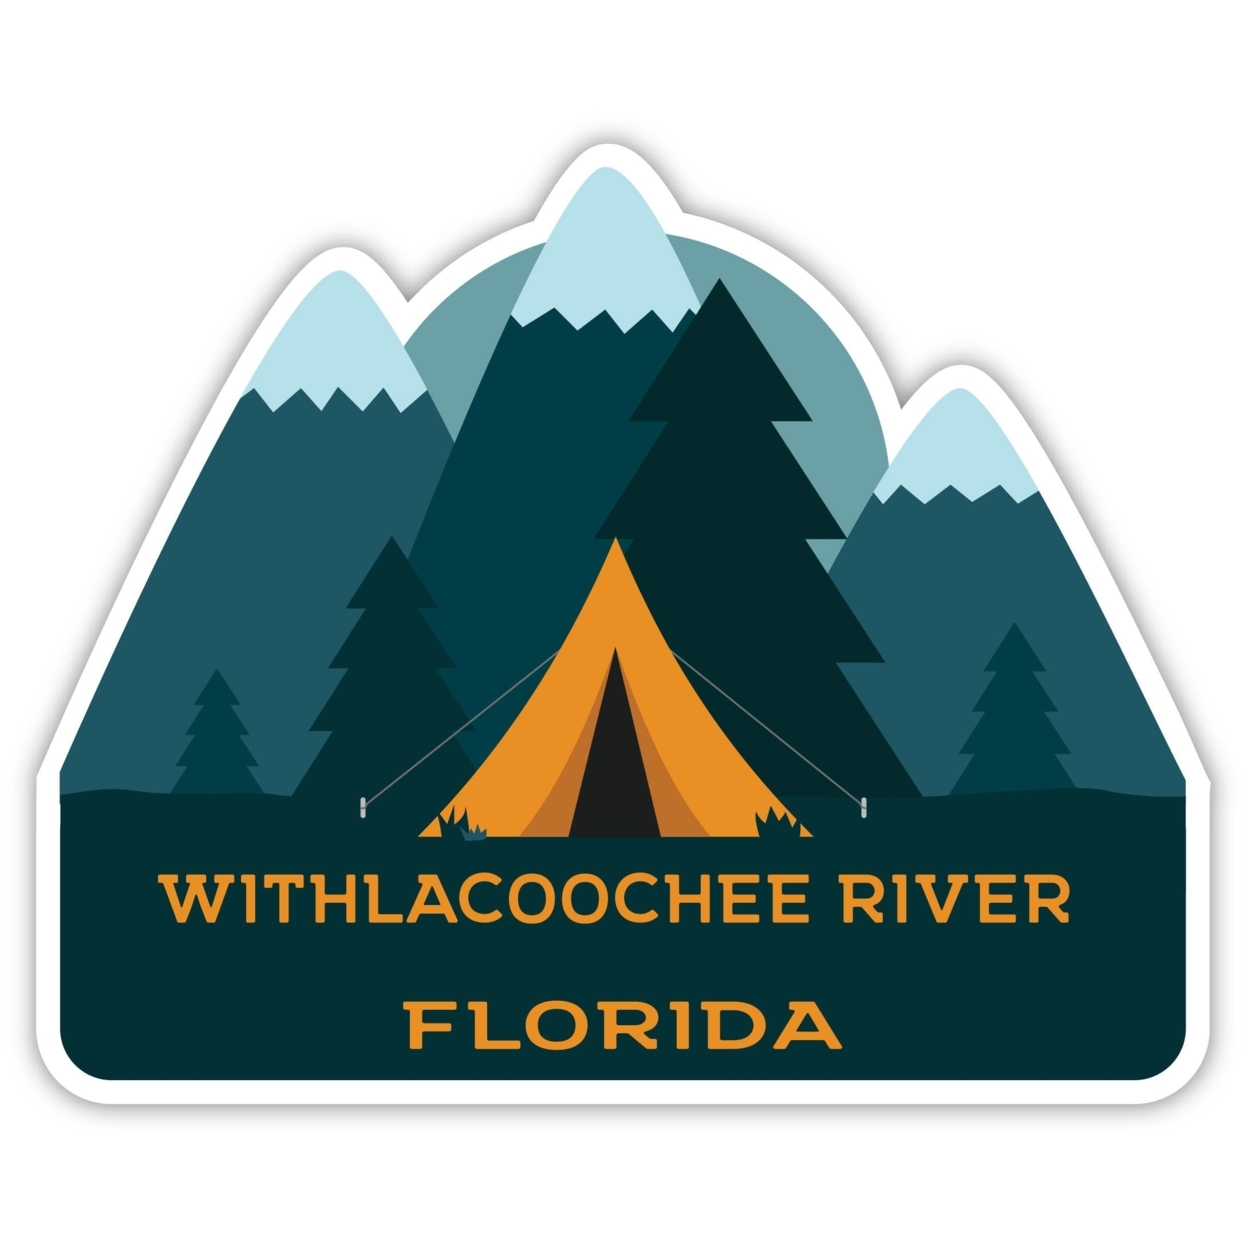 Withlacoochee River Florida Souvenir Decorative Stickers (Choose Theme And Size) - Single Unit, 4-Inch, Camp Life